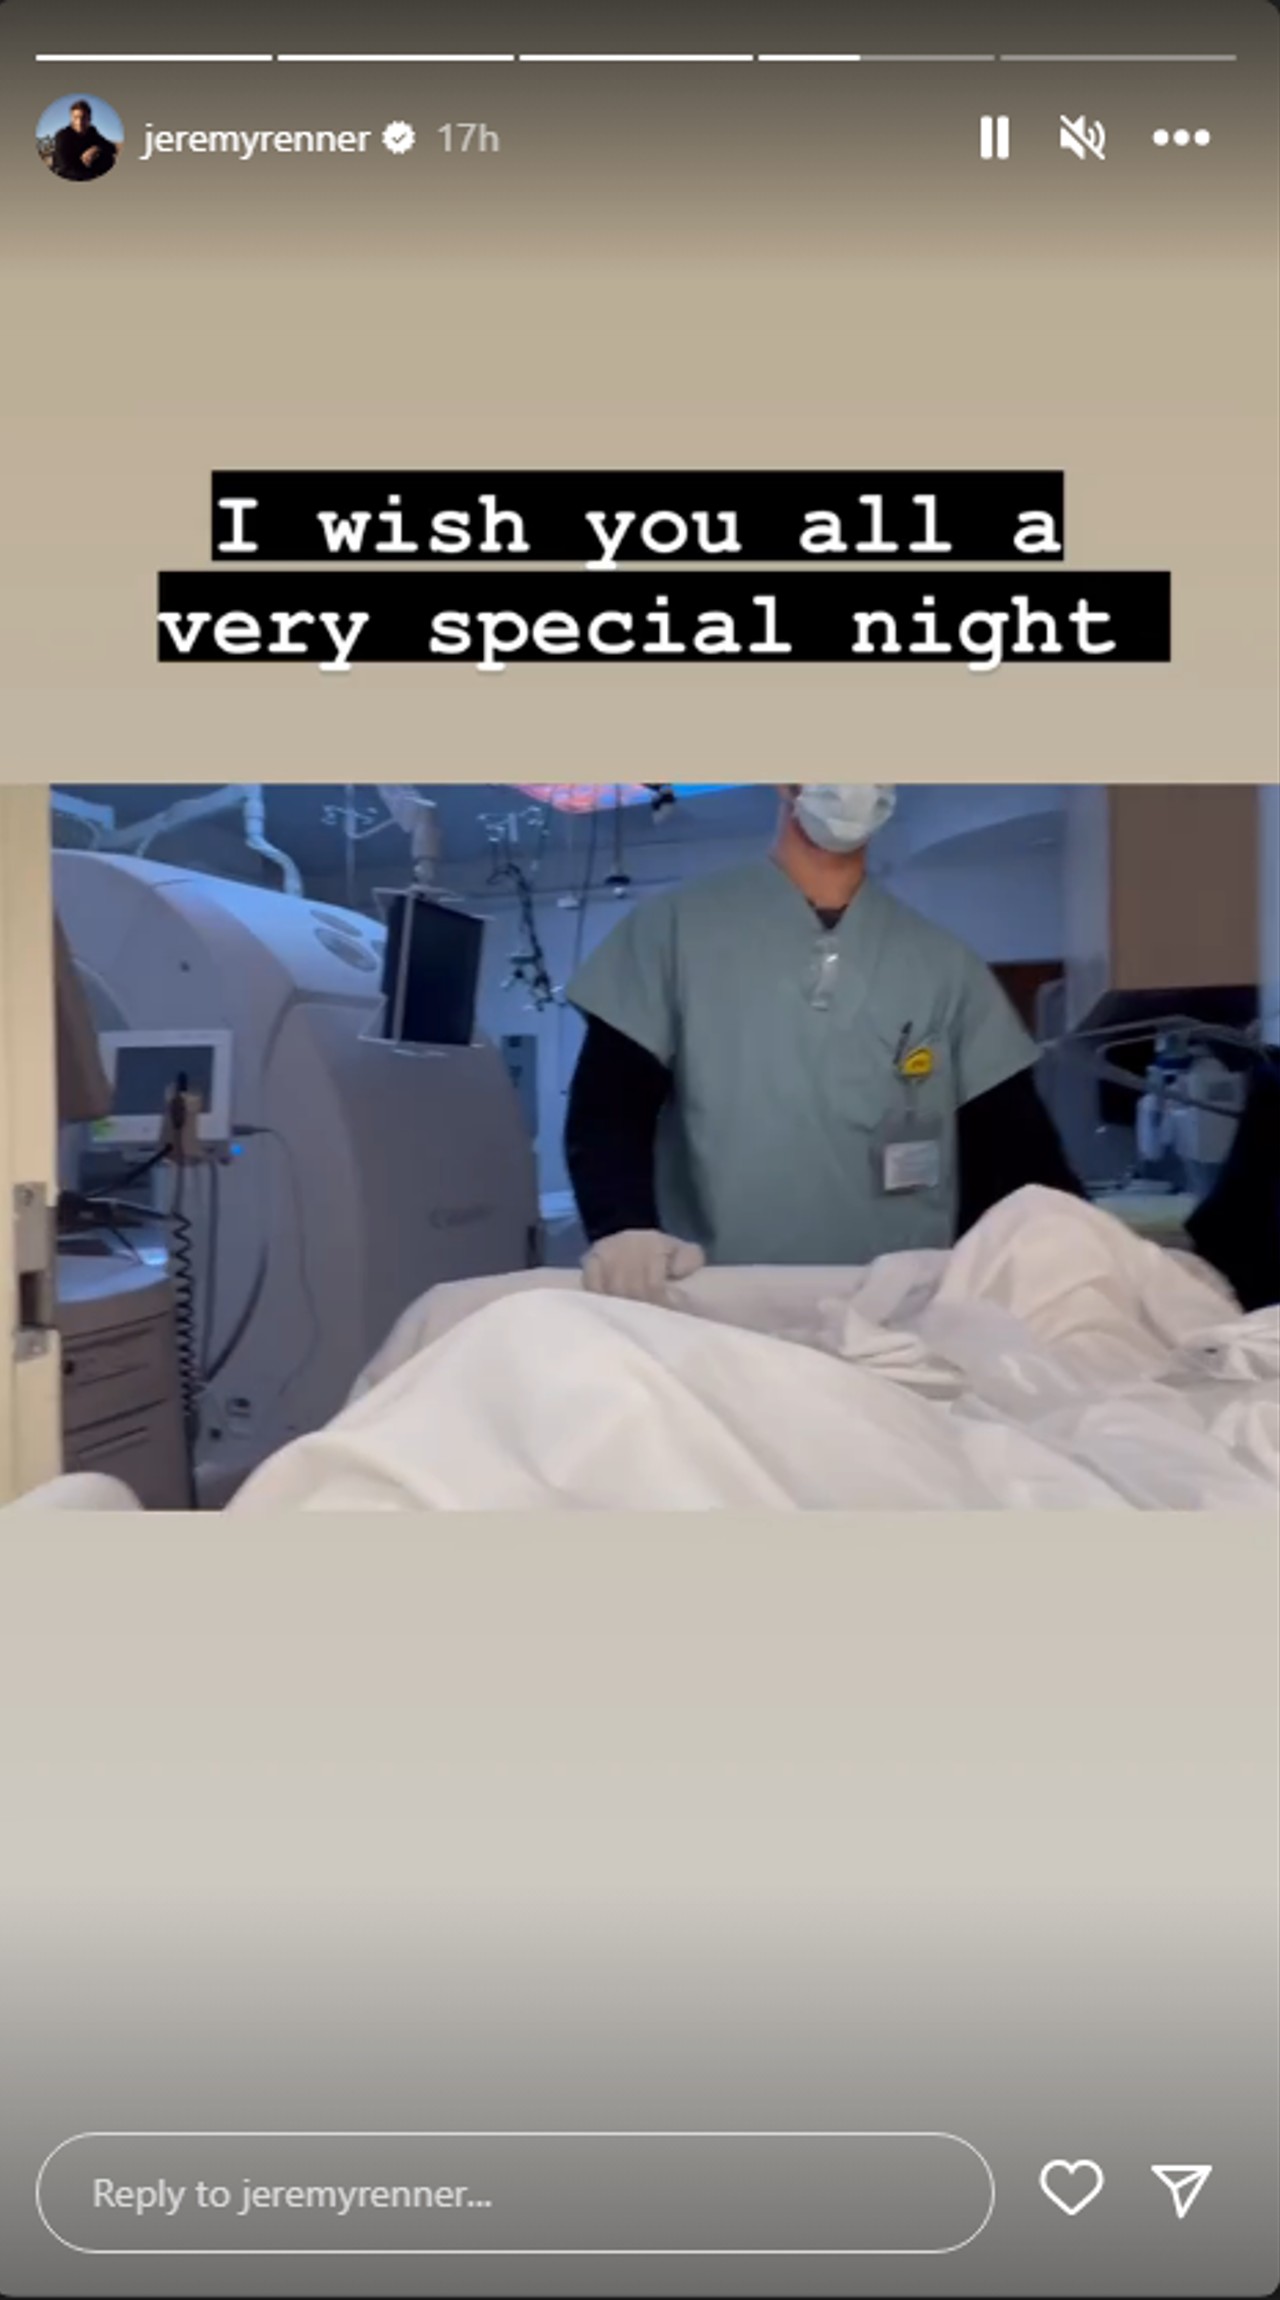 Jeremy Renner posted a video being wheeled around the hospital wishing his fans a special night.